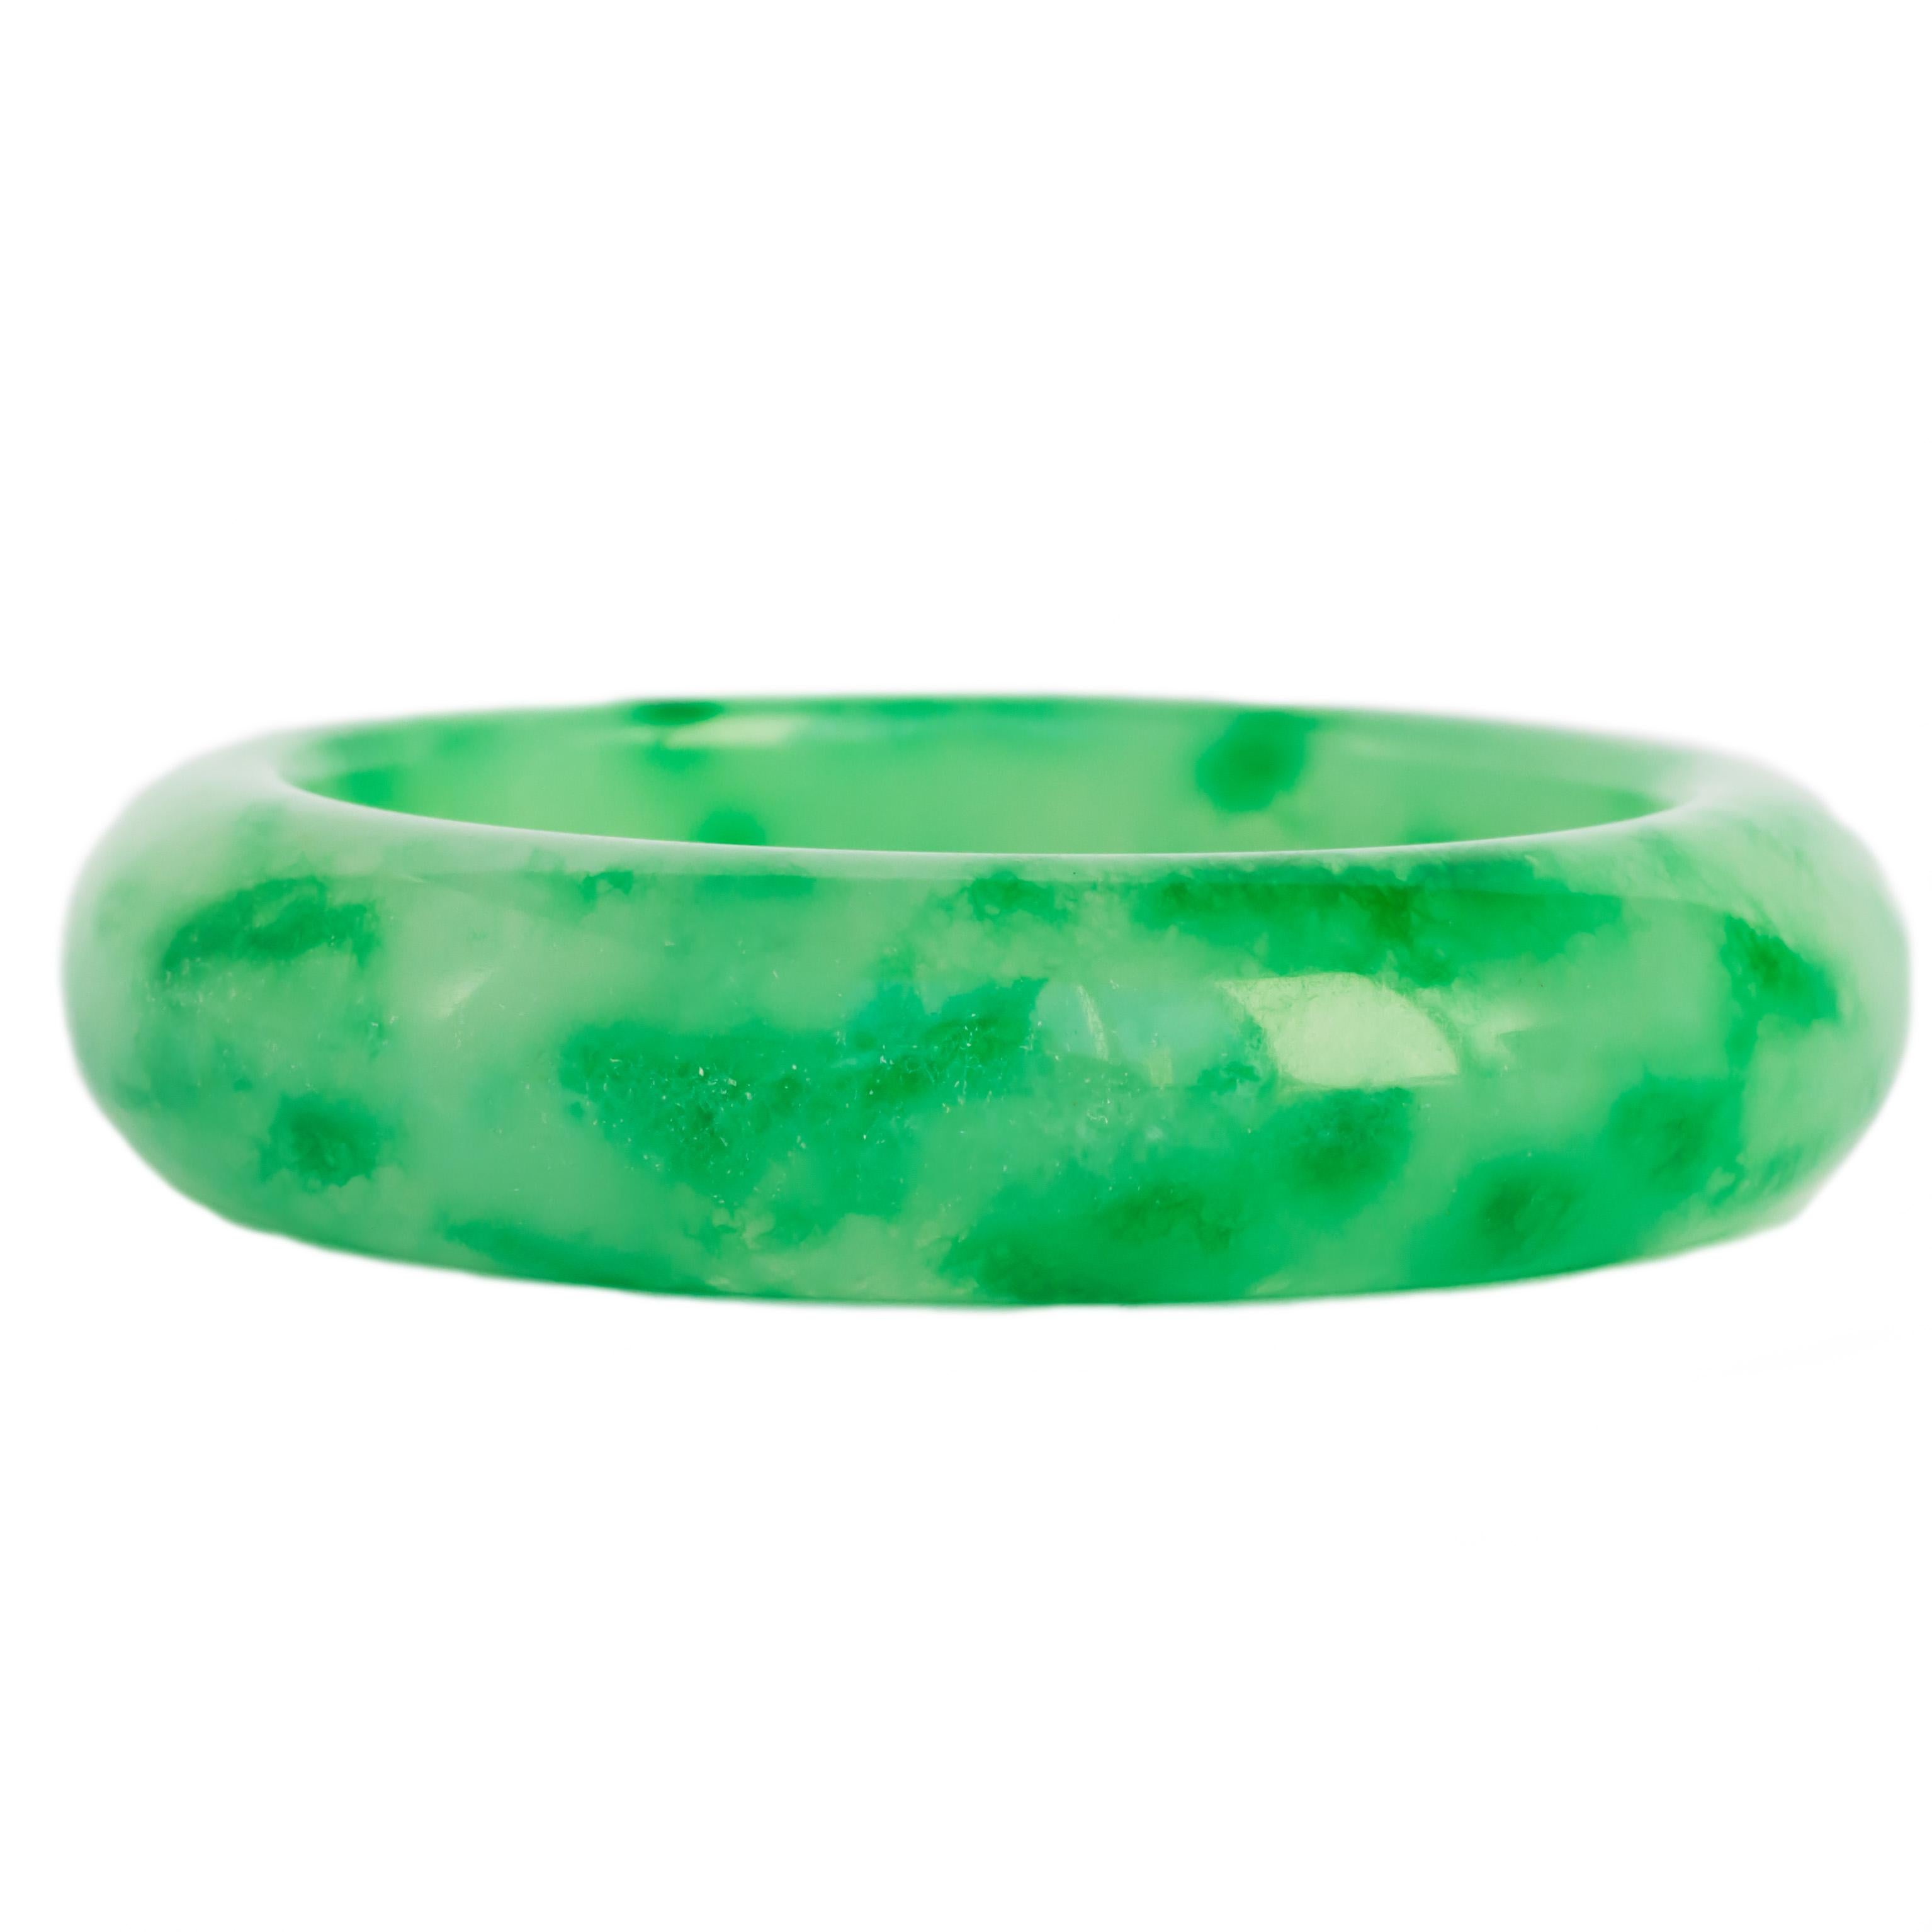 Size: 2.20 inches
Type: Jade (Dyed) 
Weight:  75.4 grams

Finger to Top of Stone Measurement: 1.00mm
Width: 7.11mm